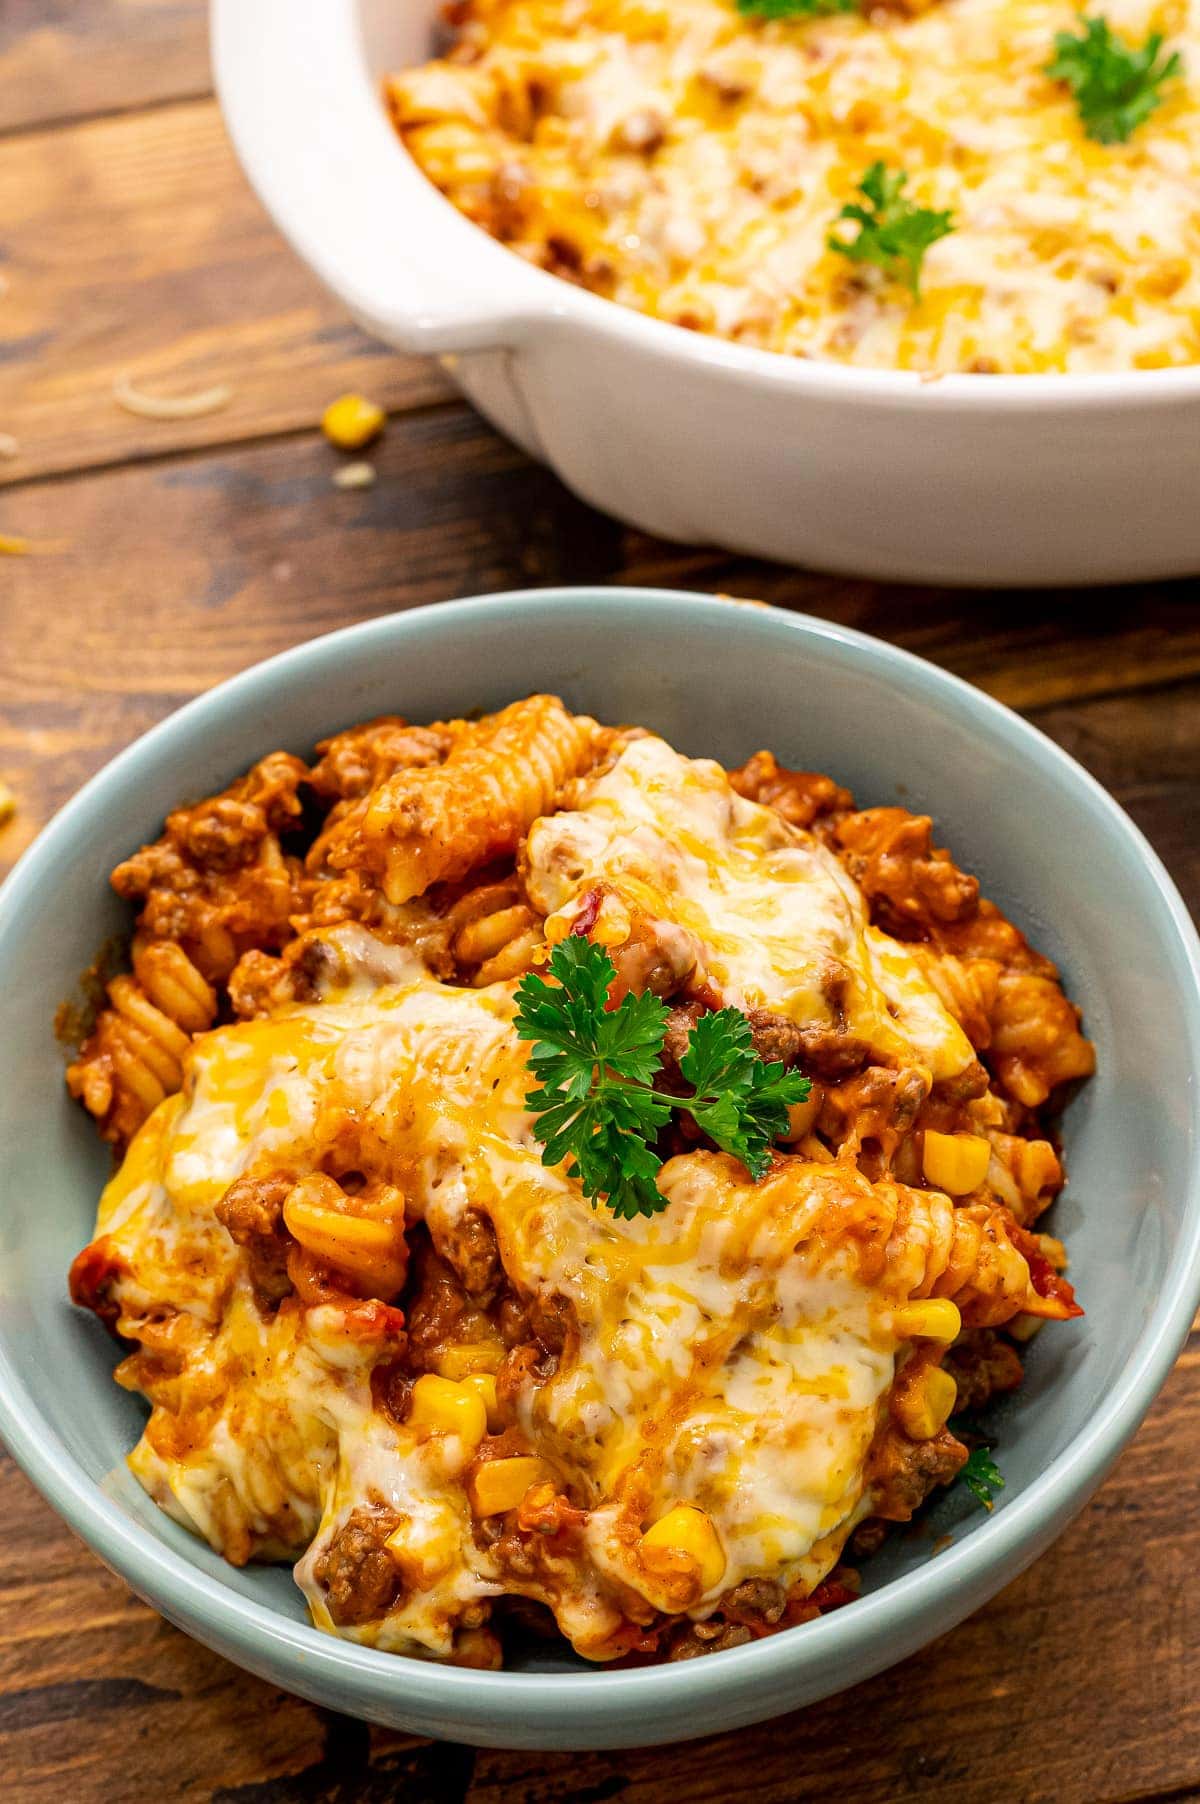 Mexican Pasta Bake in blue bowl topped with parsley